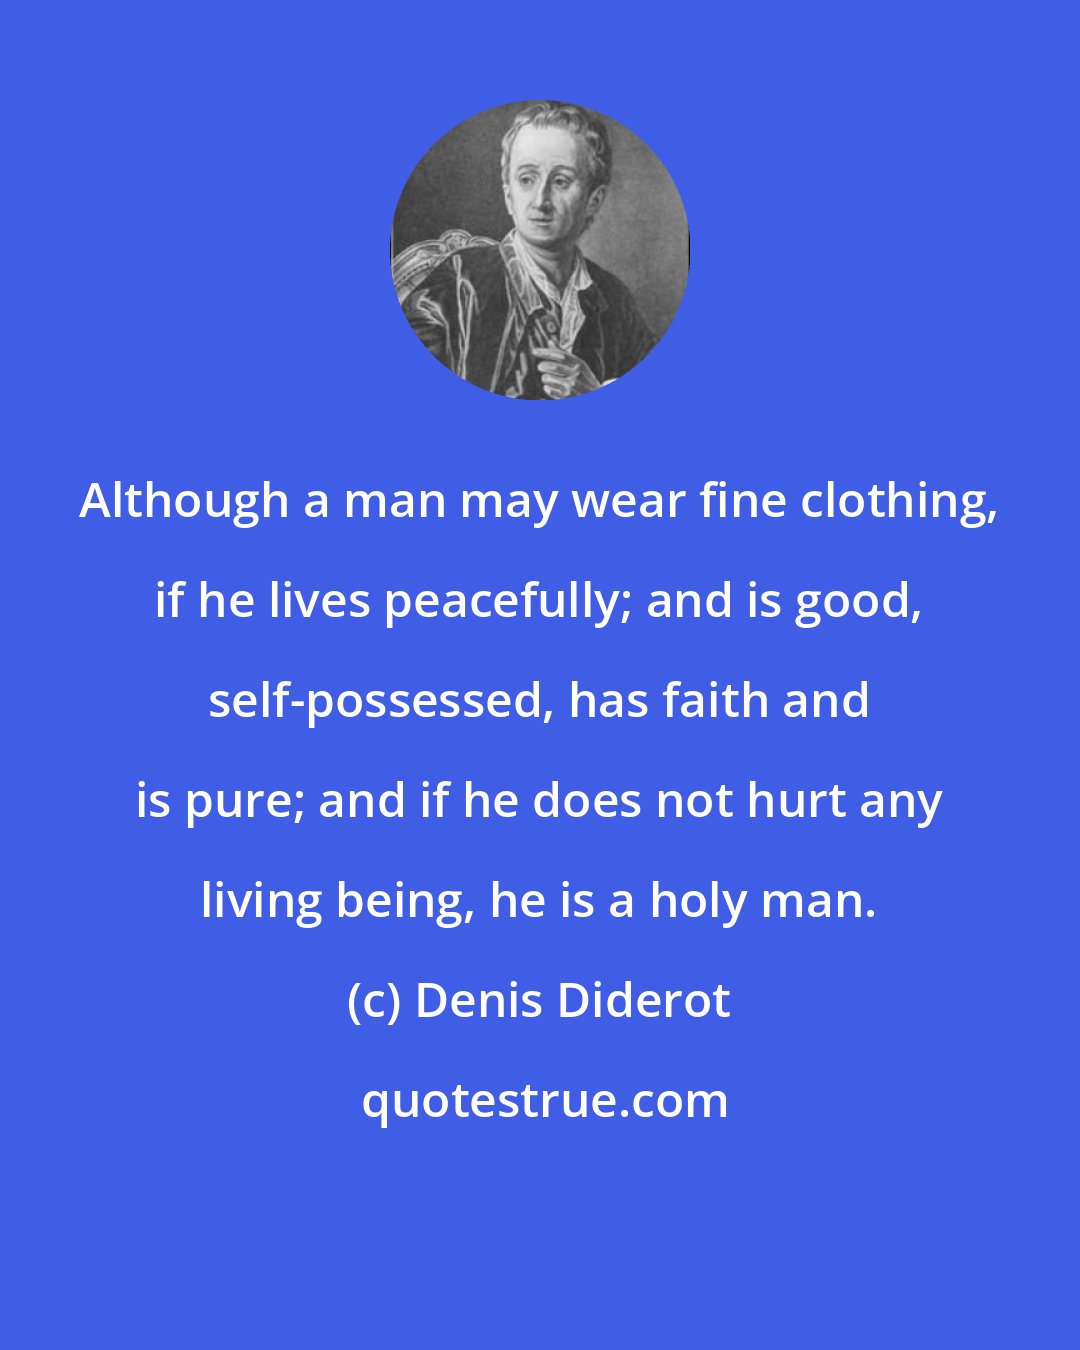 Denis Diderot: Although a man may wear fine clothing, if he lives peacefully; and is good, self-possessed, has faith and is pure; and if he does not hurt any living being, he is a holy man.